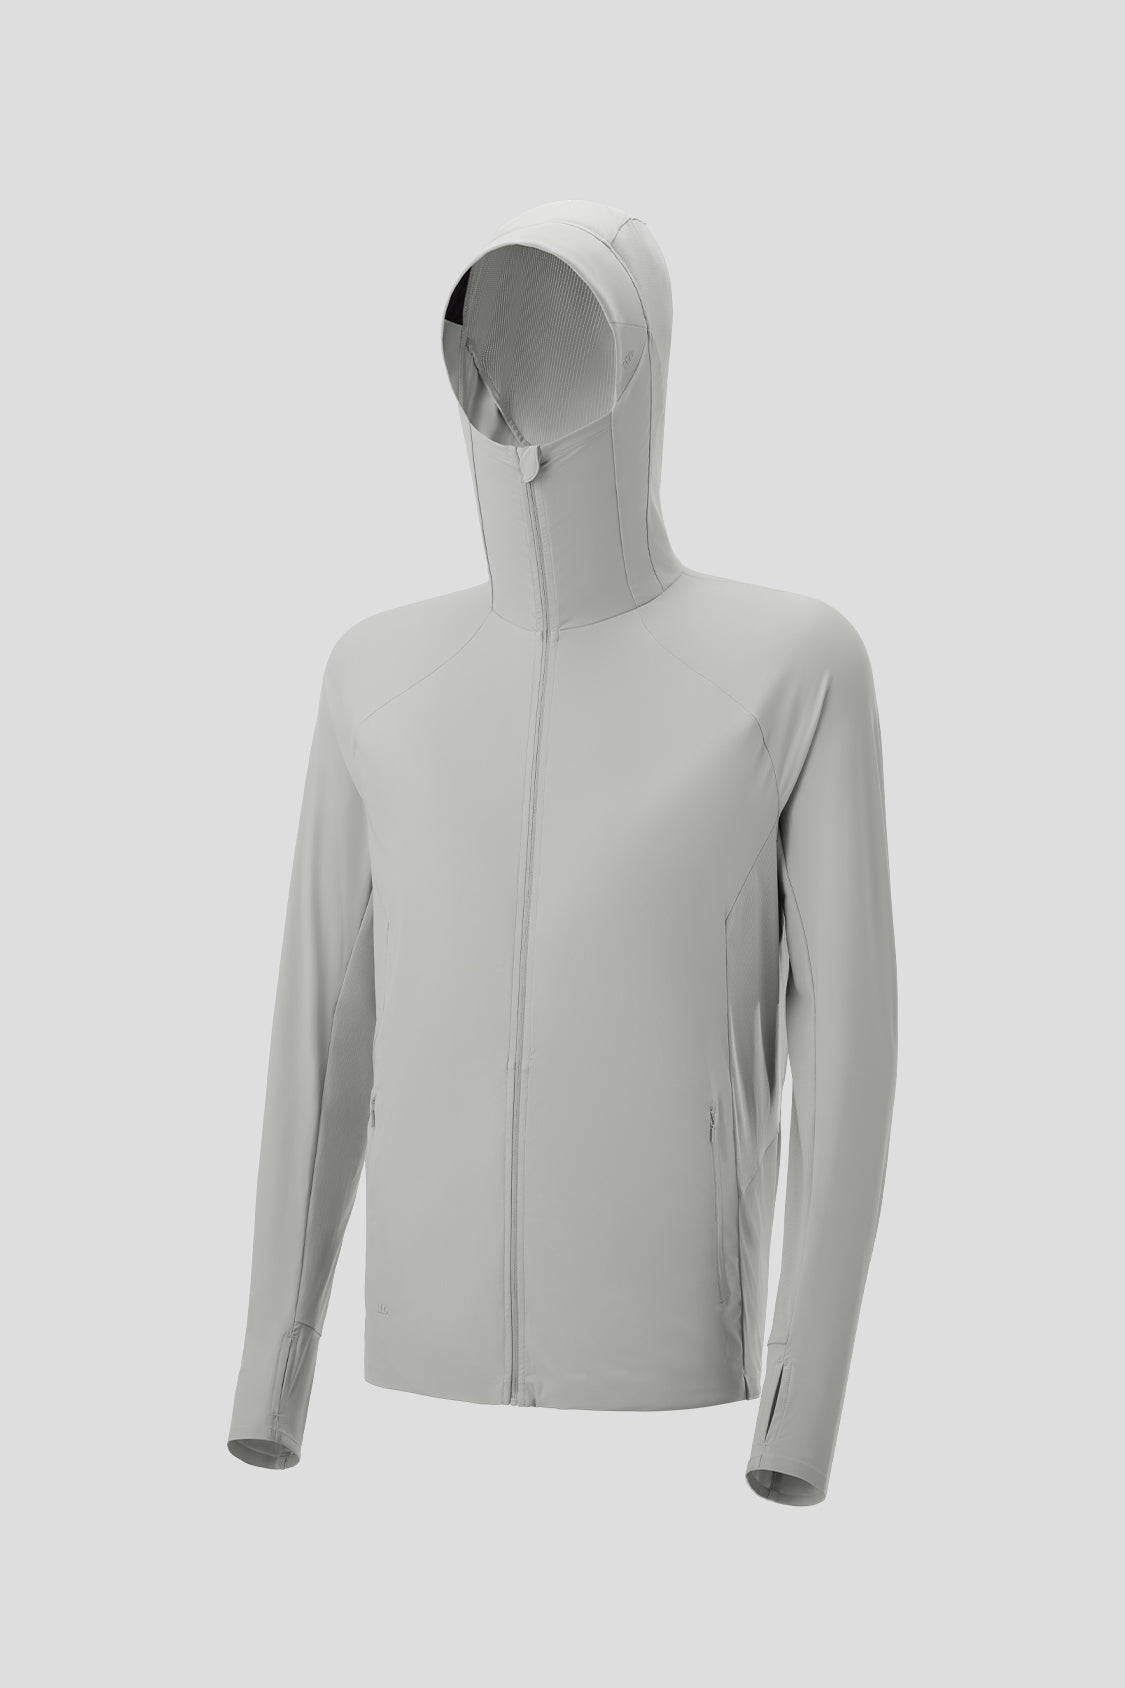 IceAiry - Men's Breathable Sun Protection Jacket UPF50+